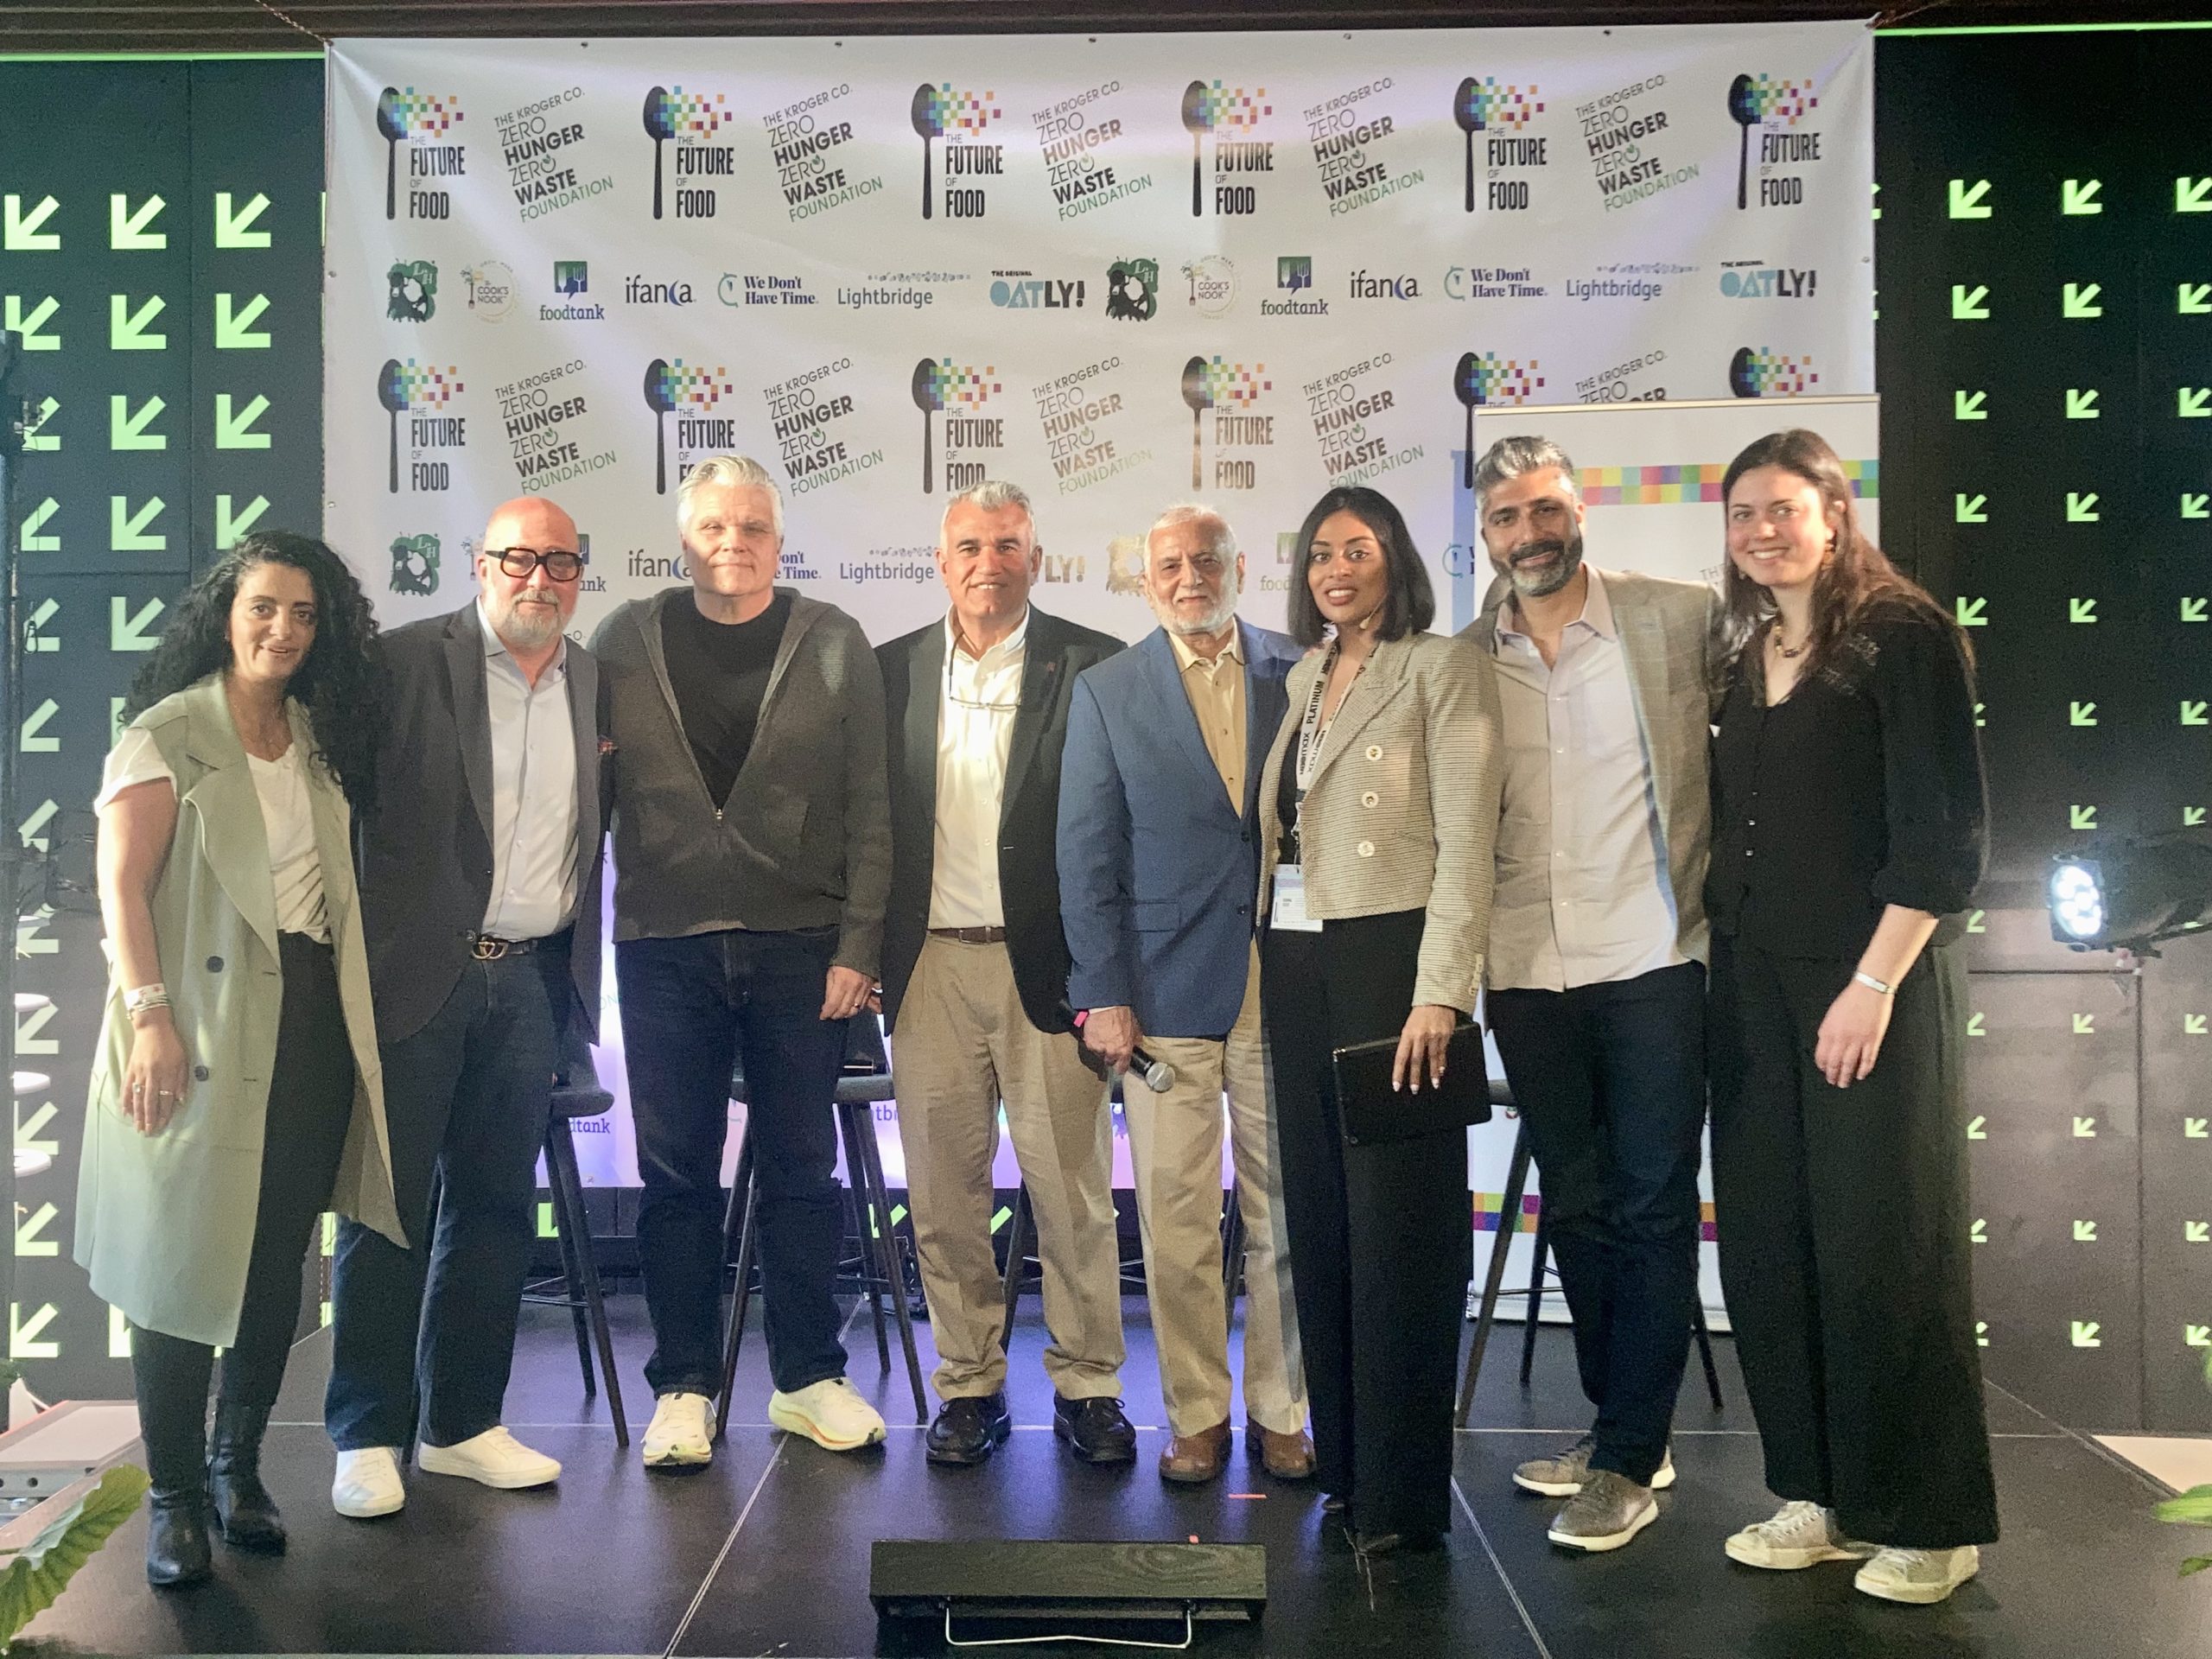 Ketchum team members at SXSW Future of Food Conference